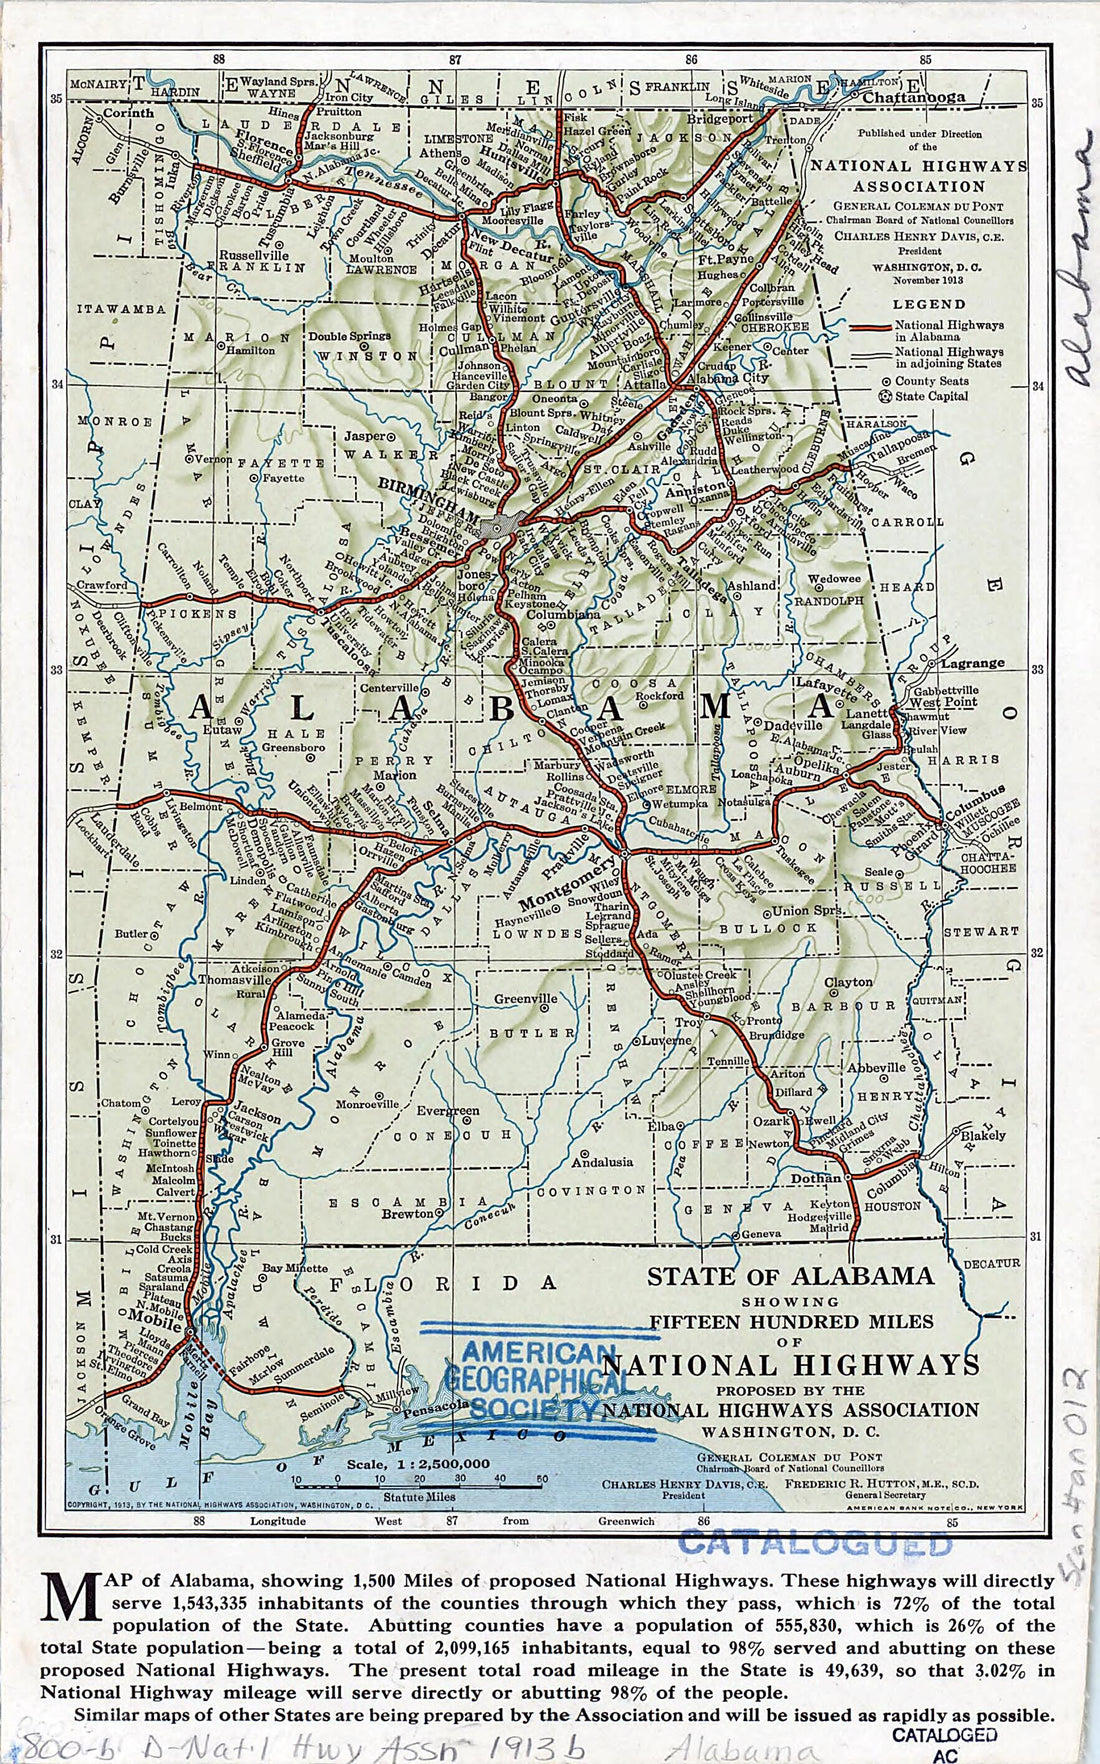 This old map of State of Alabama Showing Fifteen Hundred Miles of National Highways. (State of Alabama Showing Fifteen Hundred Miles of National Highways Proposed by the National Highways Association) from 1913 was created by  American Bank Note Company,